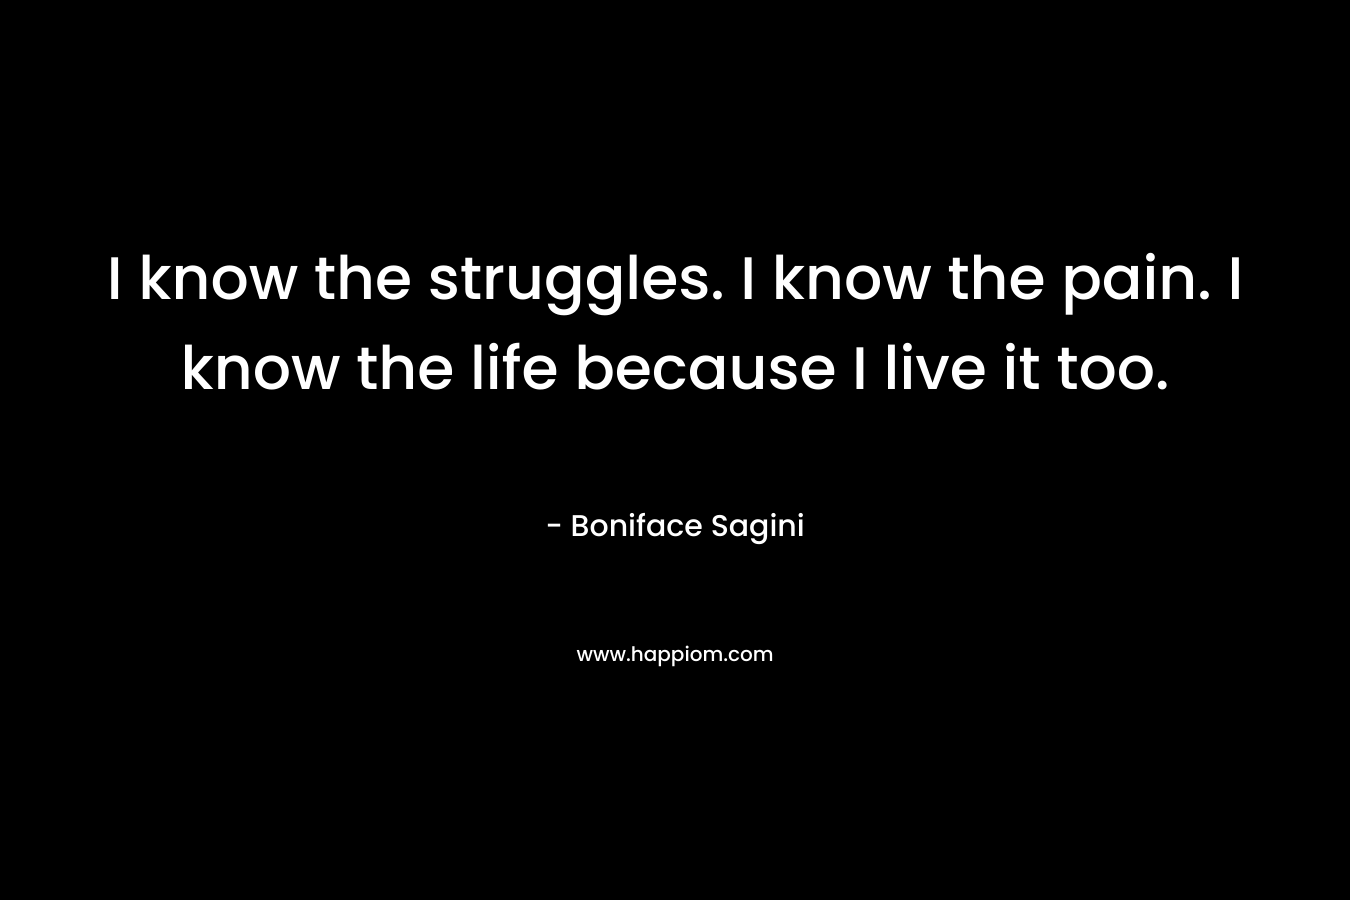 I know the struggles. I know the pain. I know the life because I live it too.